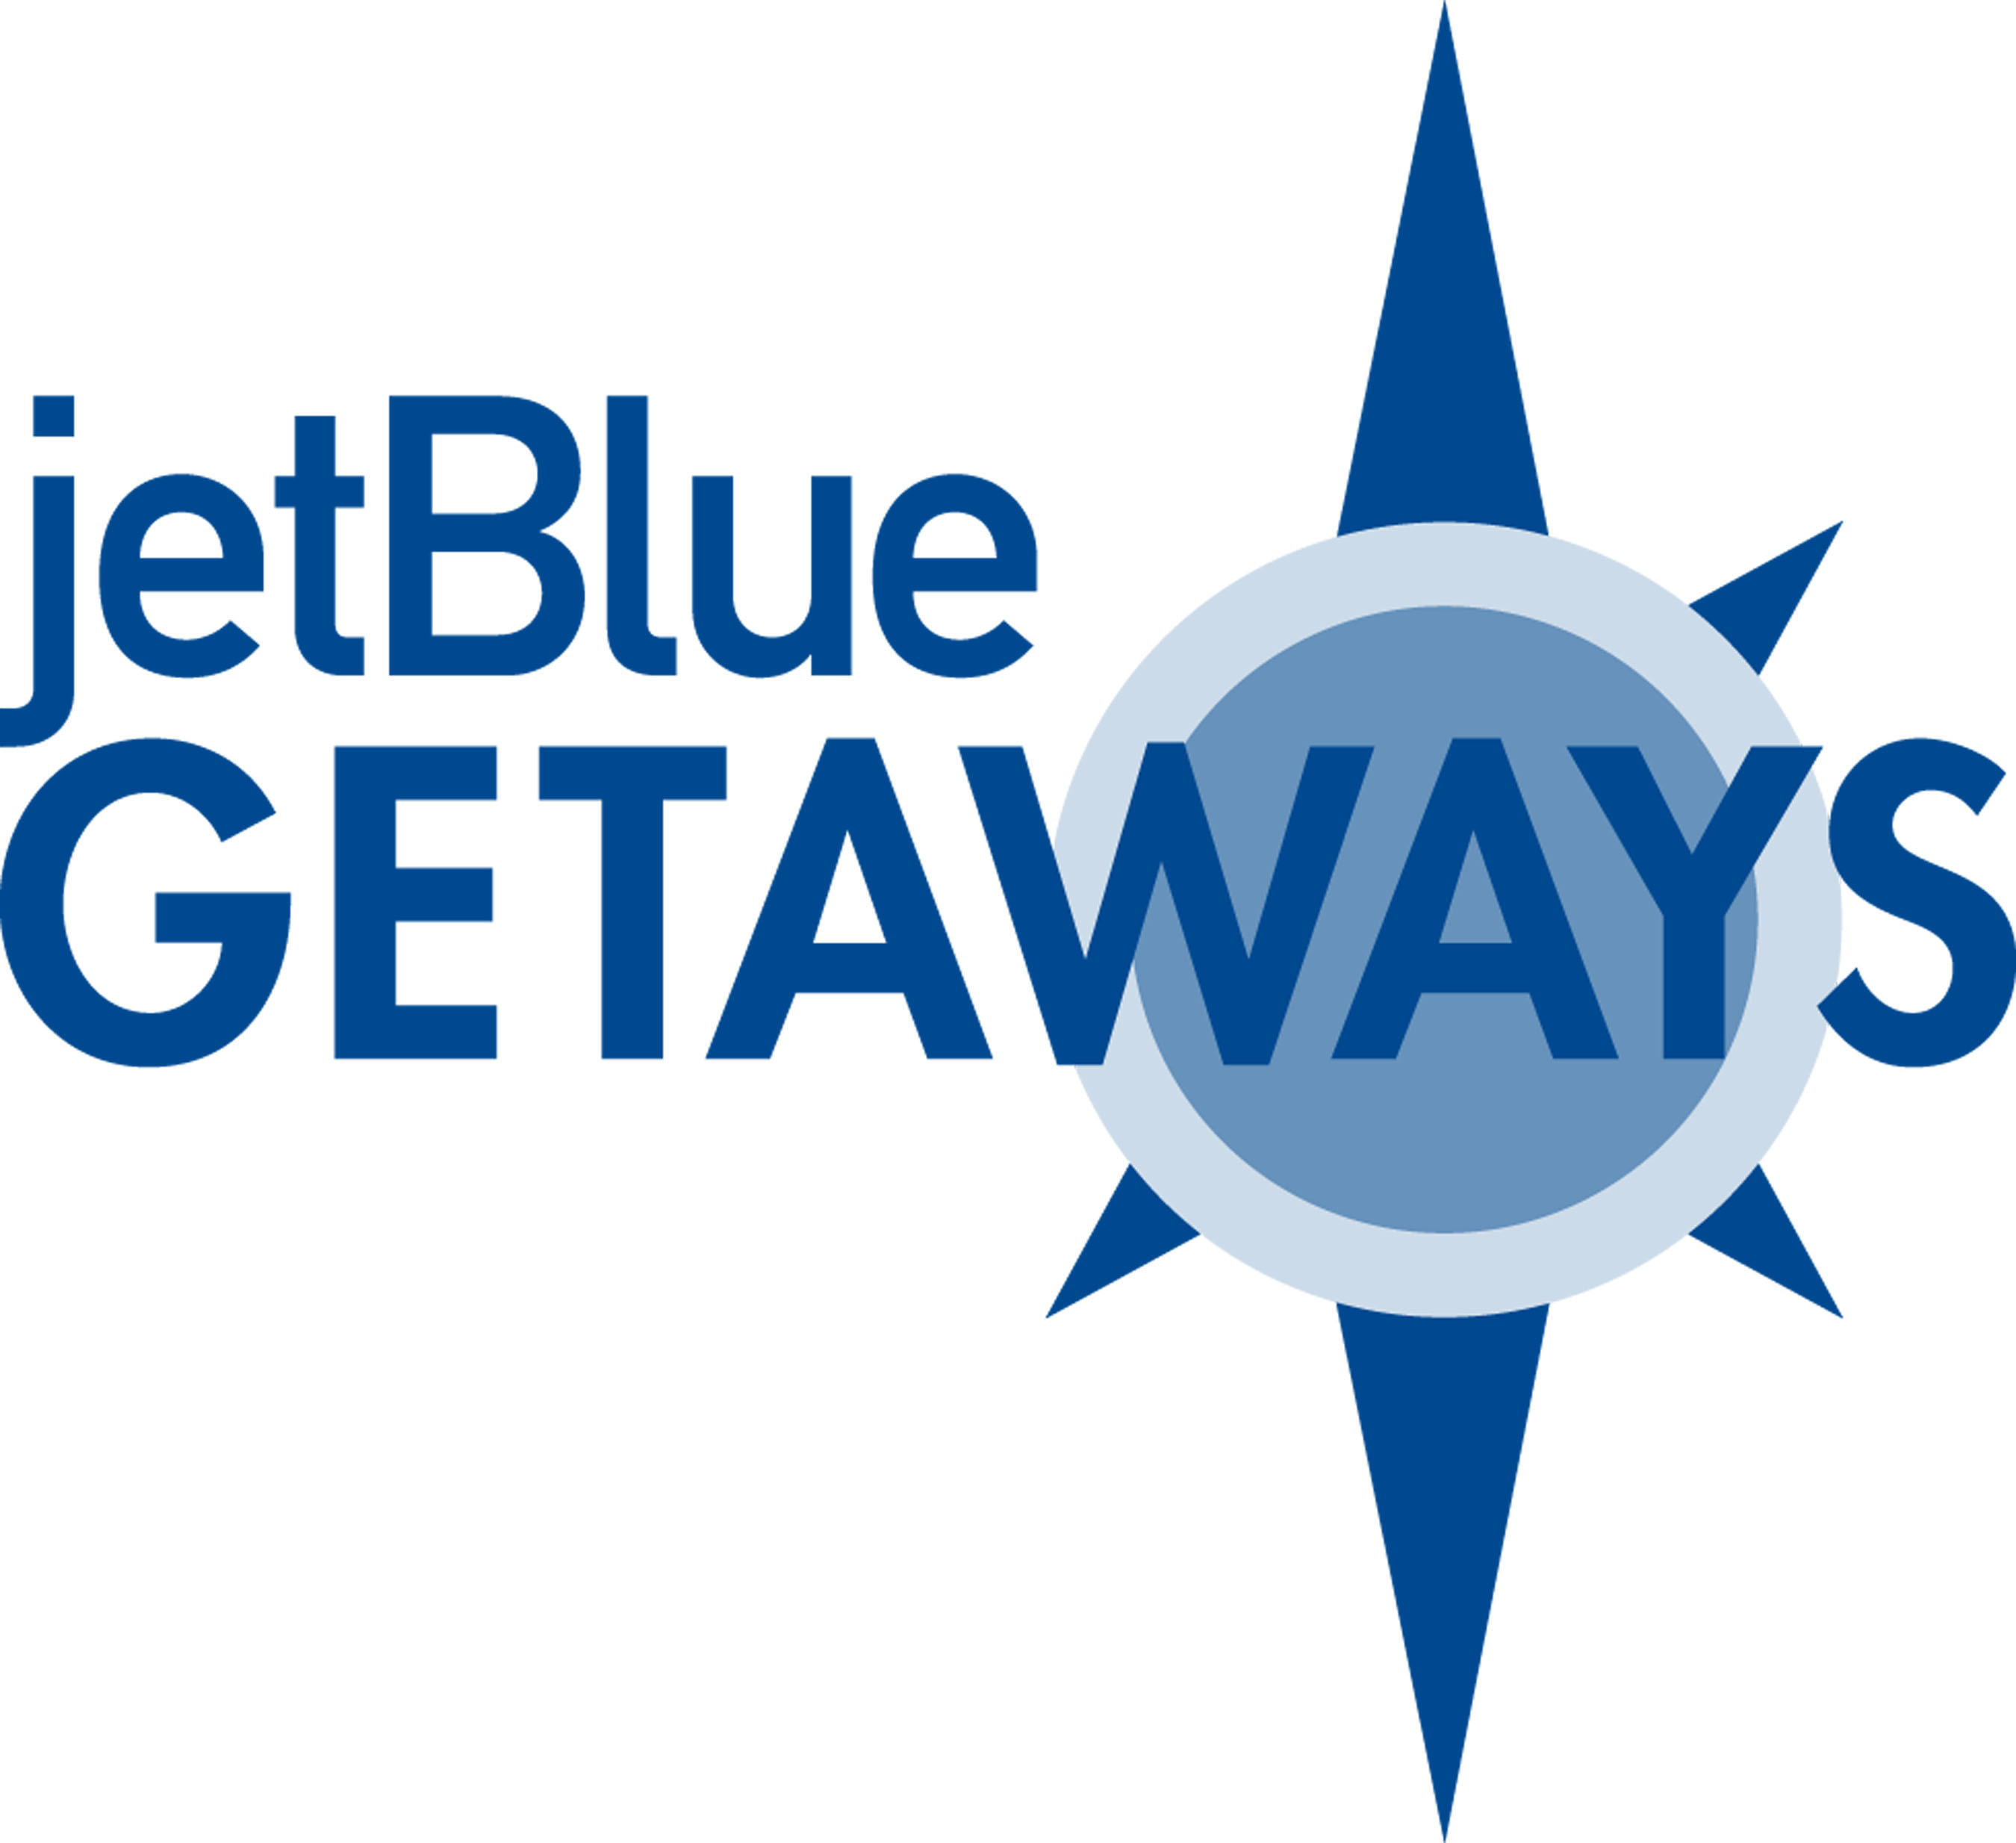 JetBlue Getaways: First Vacation Program to Partner with Google Offers